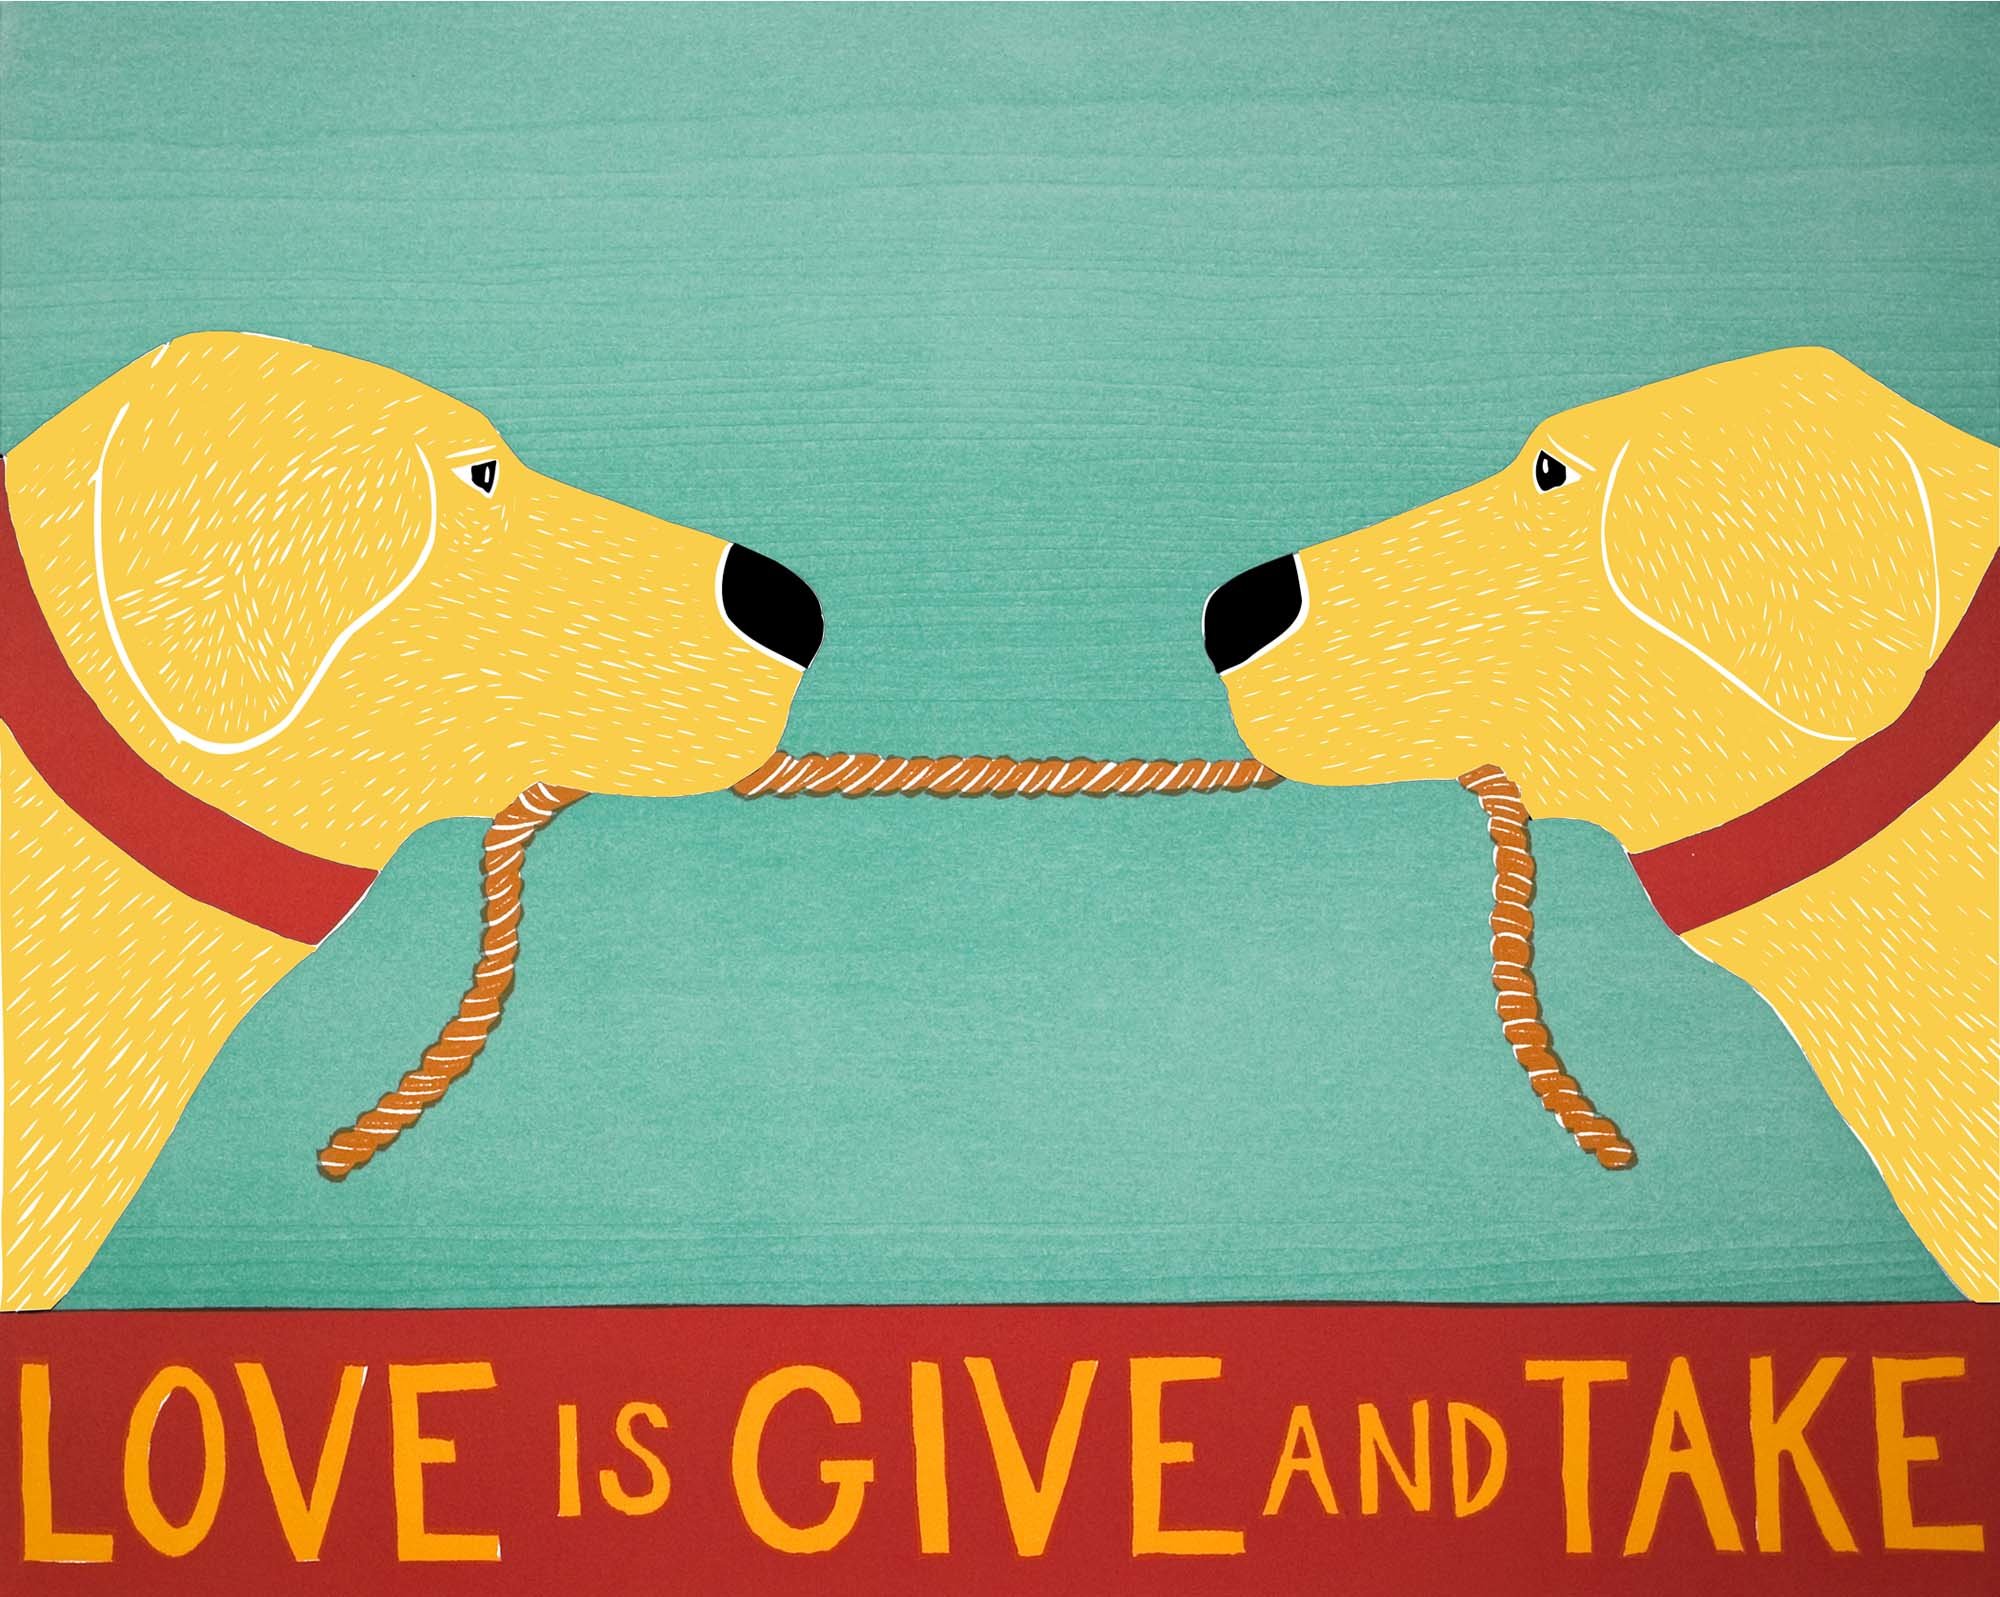 Love Is Give and Take by Stephen Huneck (Giclee Print) | Artful Home